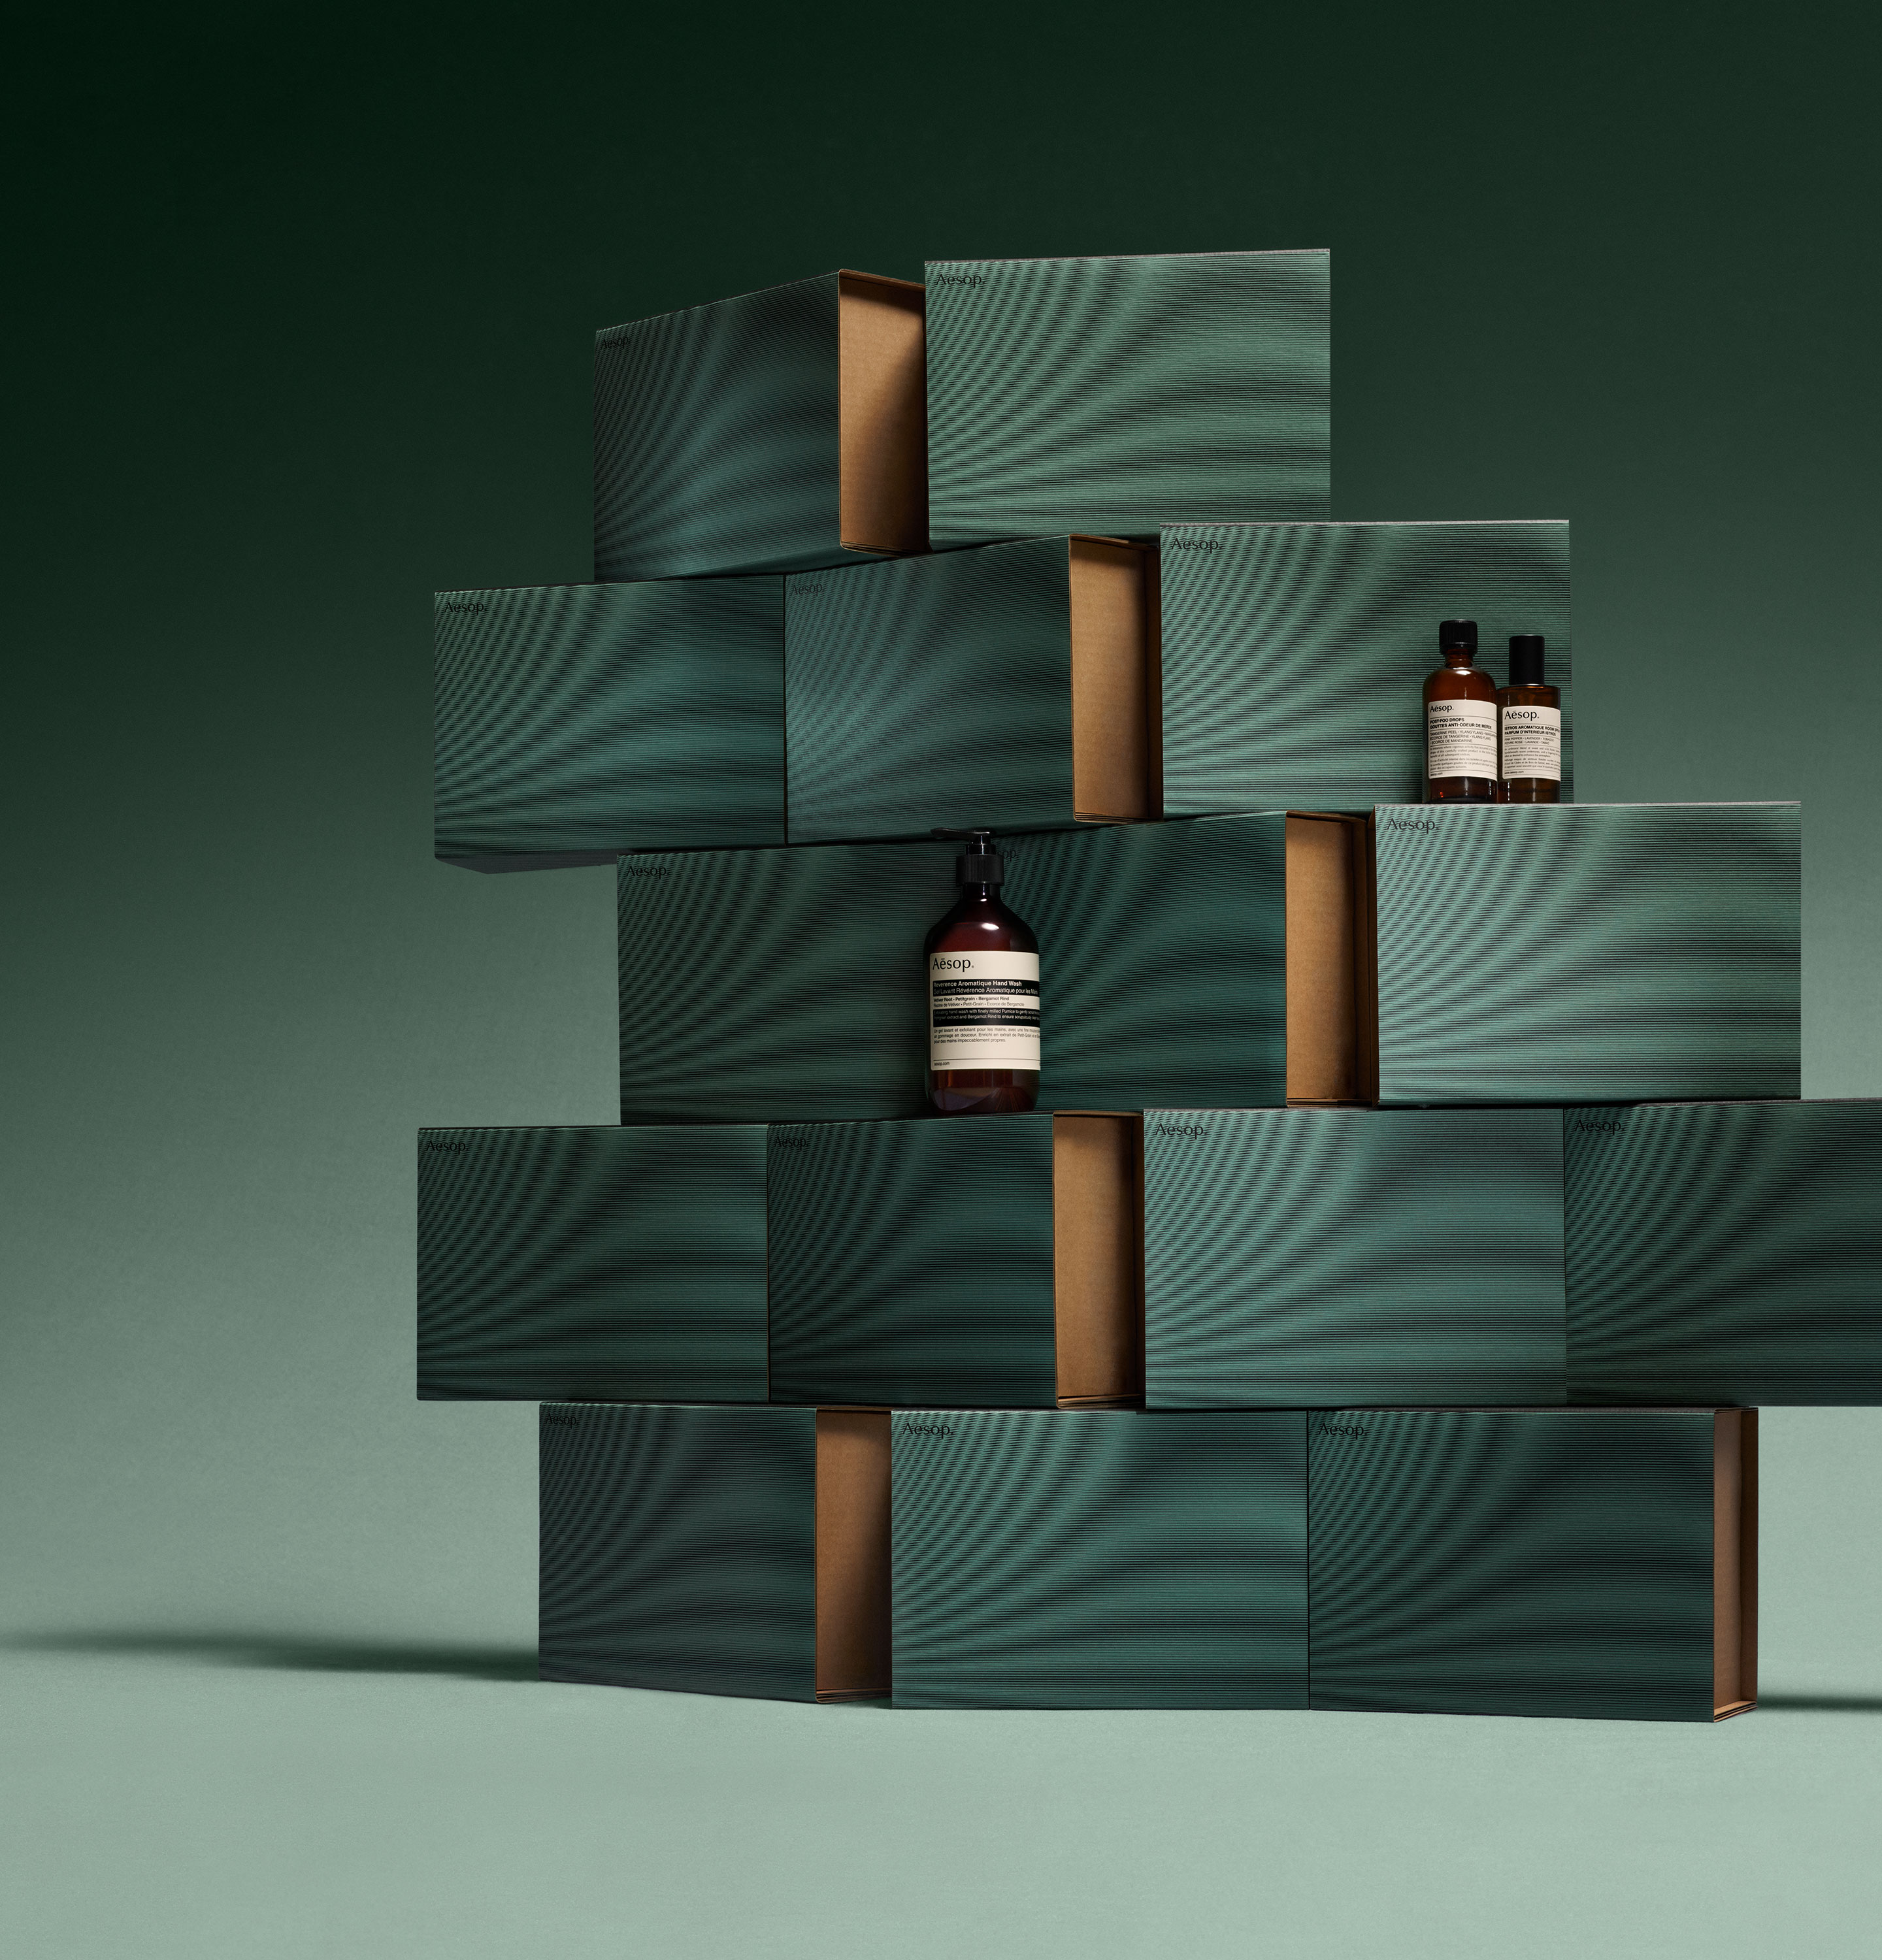 Aesop products placed on stacked blue cardboard boxes.